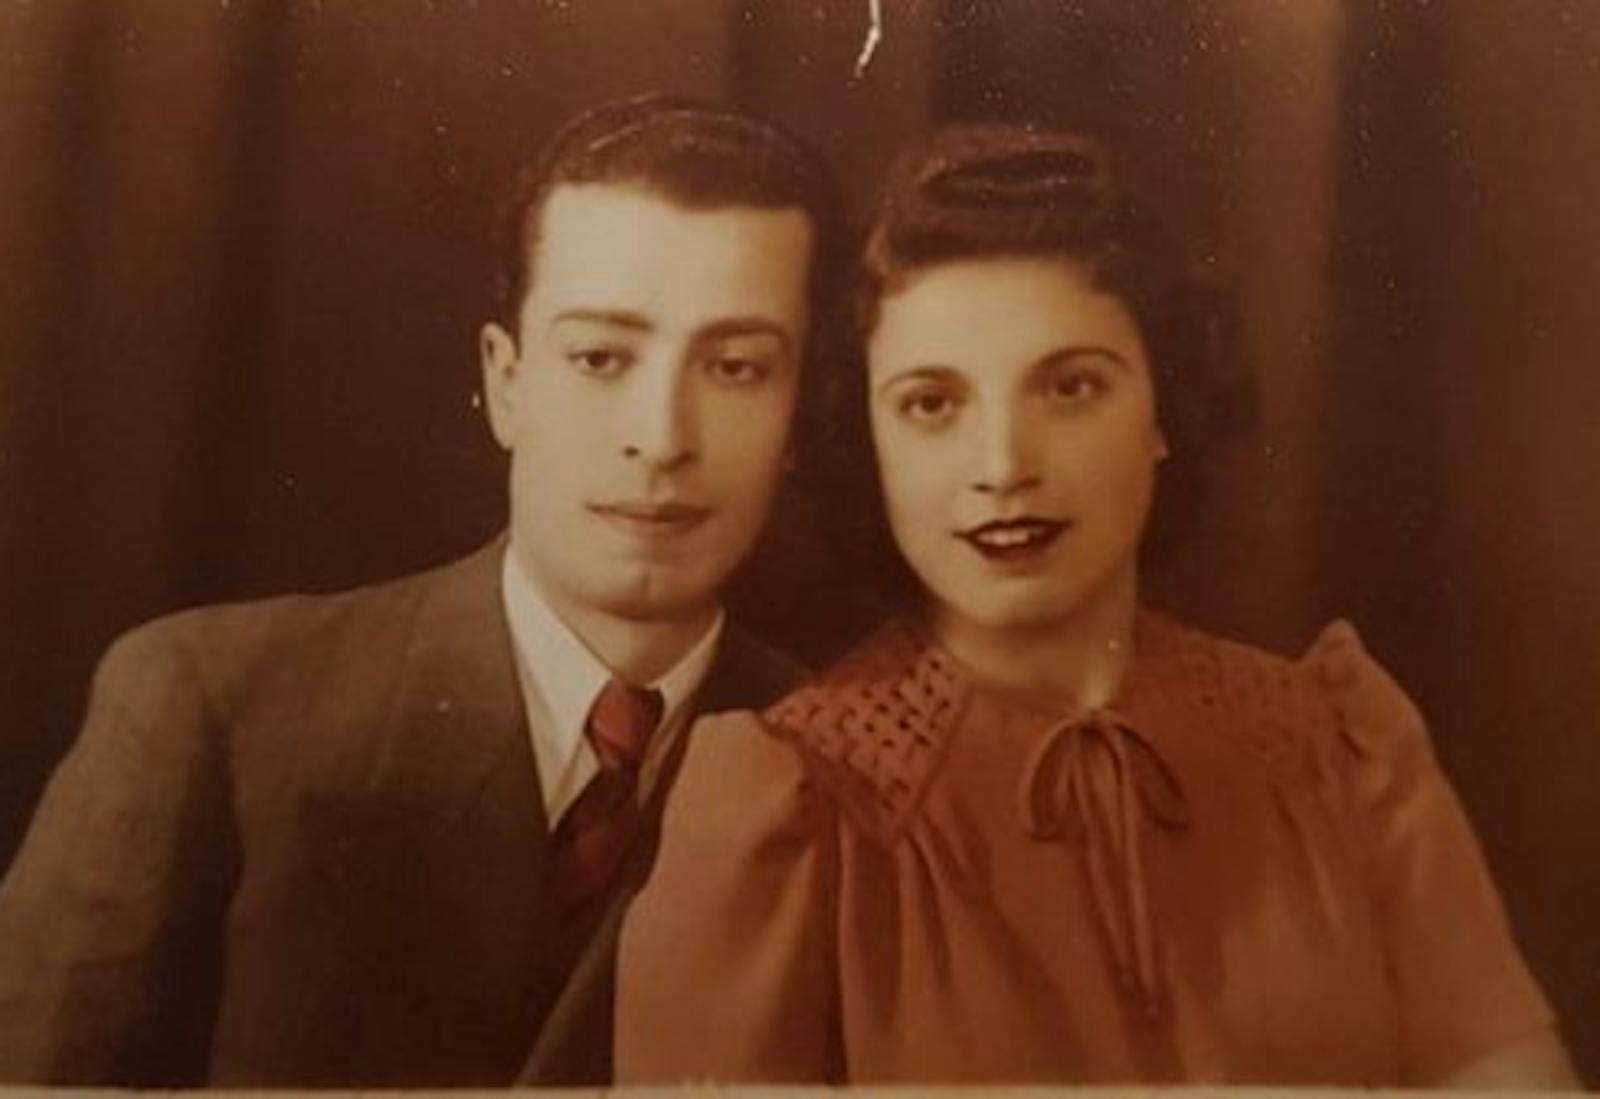 Naomi's Grandfather Yaakov and Grandmother Rashel in Syria in the 1940's.